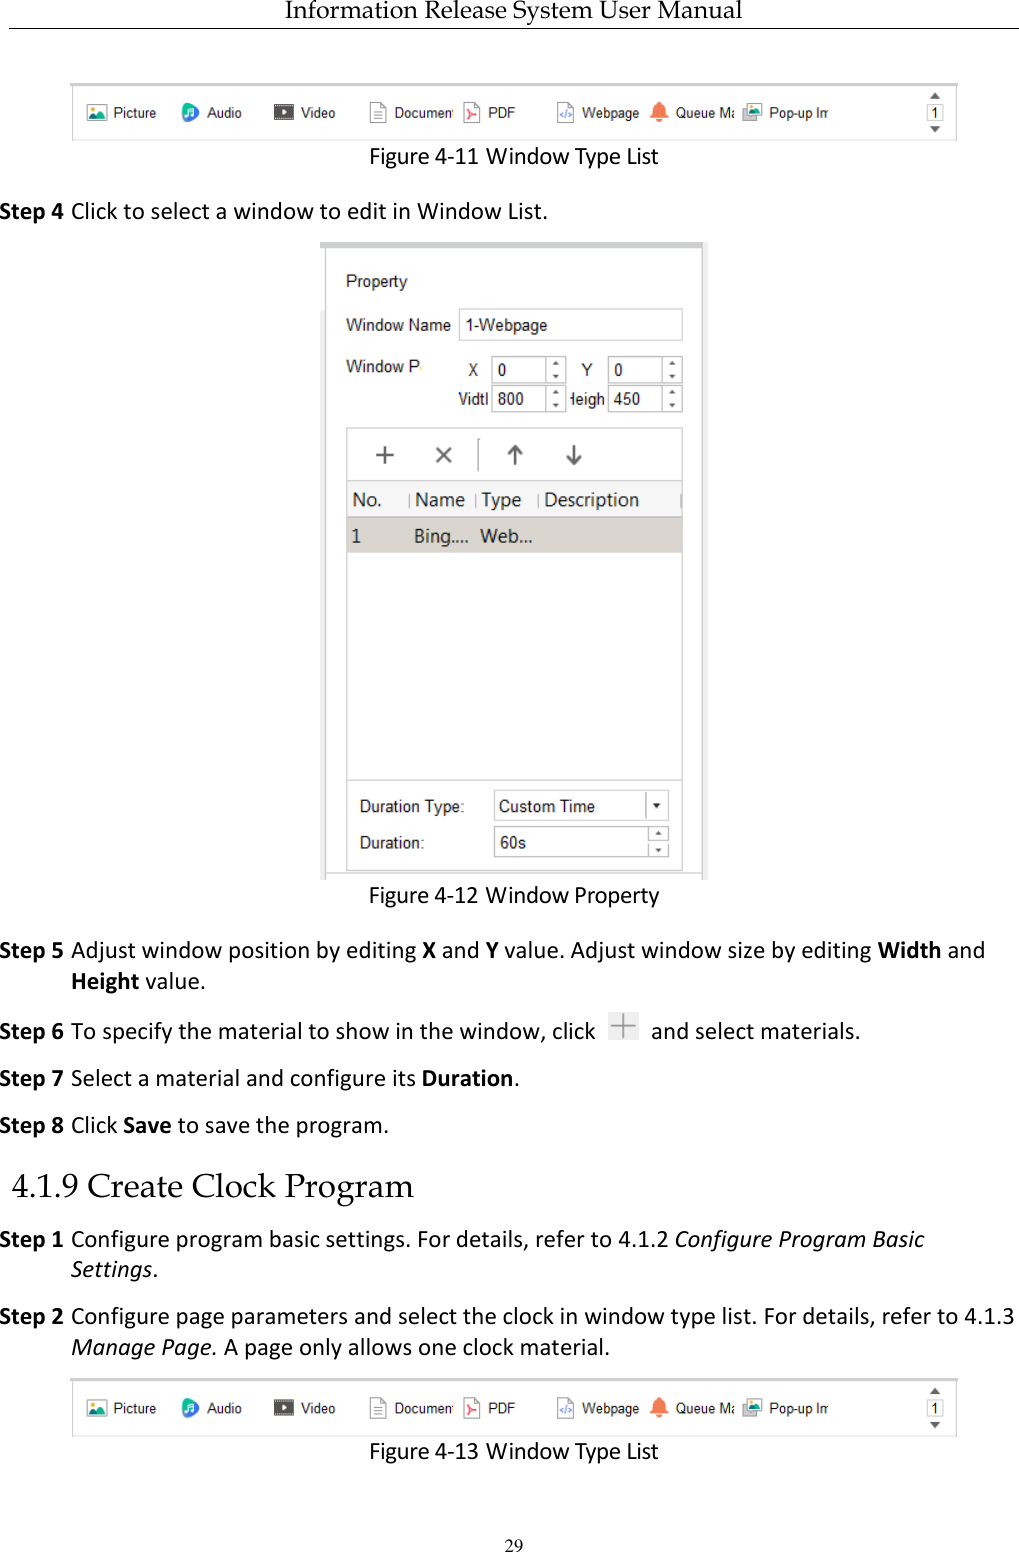 Information Release System User Manual 29  Figure 4-11 Window Type List Step 4 Click to select a window to edit in Window List.  Figure 4-12 Window Property Step 5 Adjust window position by editing X and Y value. Adjust window size by editing Width and Height value. Step 6 To specify the material to show in the window, click    and select materials. Step 7 Select a material and configure its Duration.   Step 8 Click Save to save the program. 4.1.9 Create Clock Program Step 1 Configure program basic settings. For details, refer to 4.1.2 Configure Program Basic Settings. Step 2 Configure page parameters and select the clock in window type list. For details, refer to 4.1.3 Manage Page. A page only allows one clock material.  Figure 4-13 Window Type List 